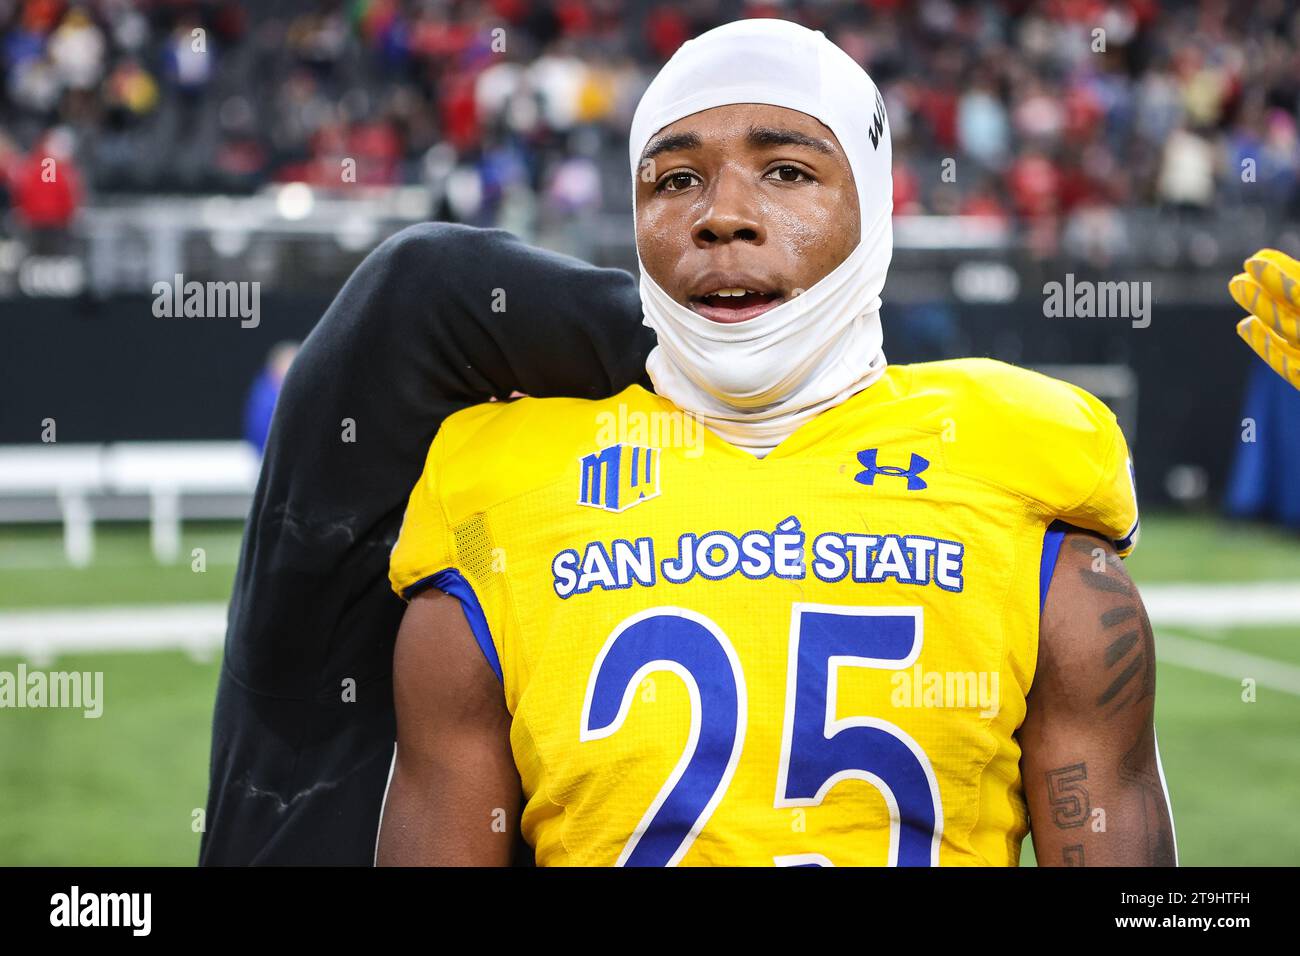 Las Vegas, NV, USA. 25th Nov, 2023. San Jose State Spartans defensive back Michael Dansby (25) on the field at the conclusion of the college football game featuring the San Jose State Spartans and the UNLV Rebels at Allegiant Stadium in Las Vegas, NV. Christopher Trim/CSM/Alamy Live News Stock Photo